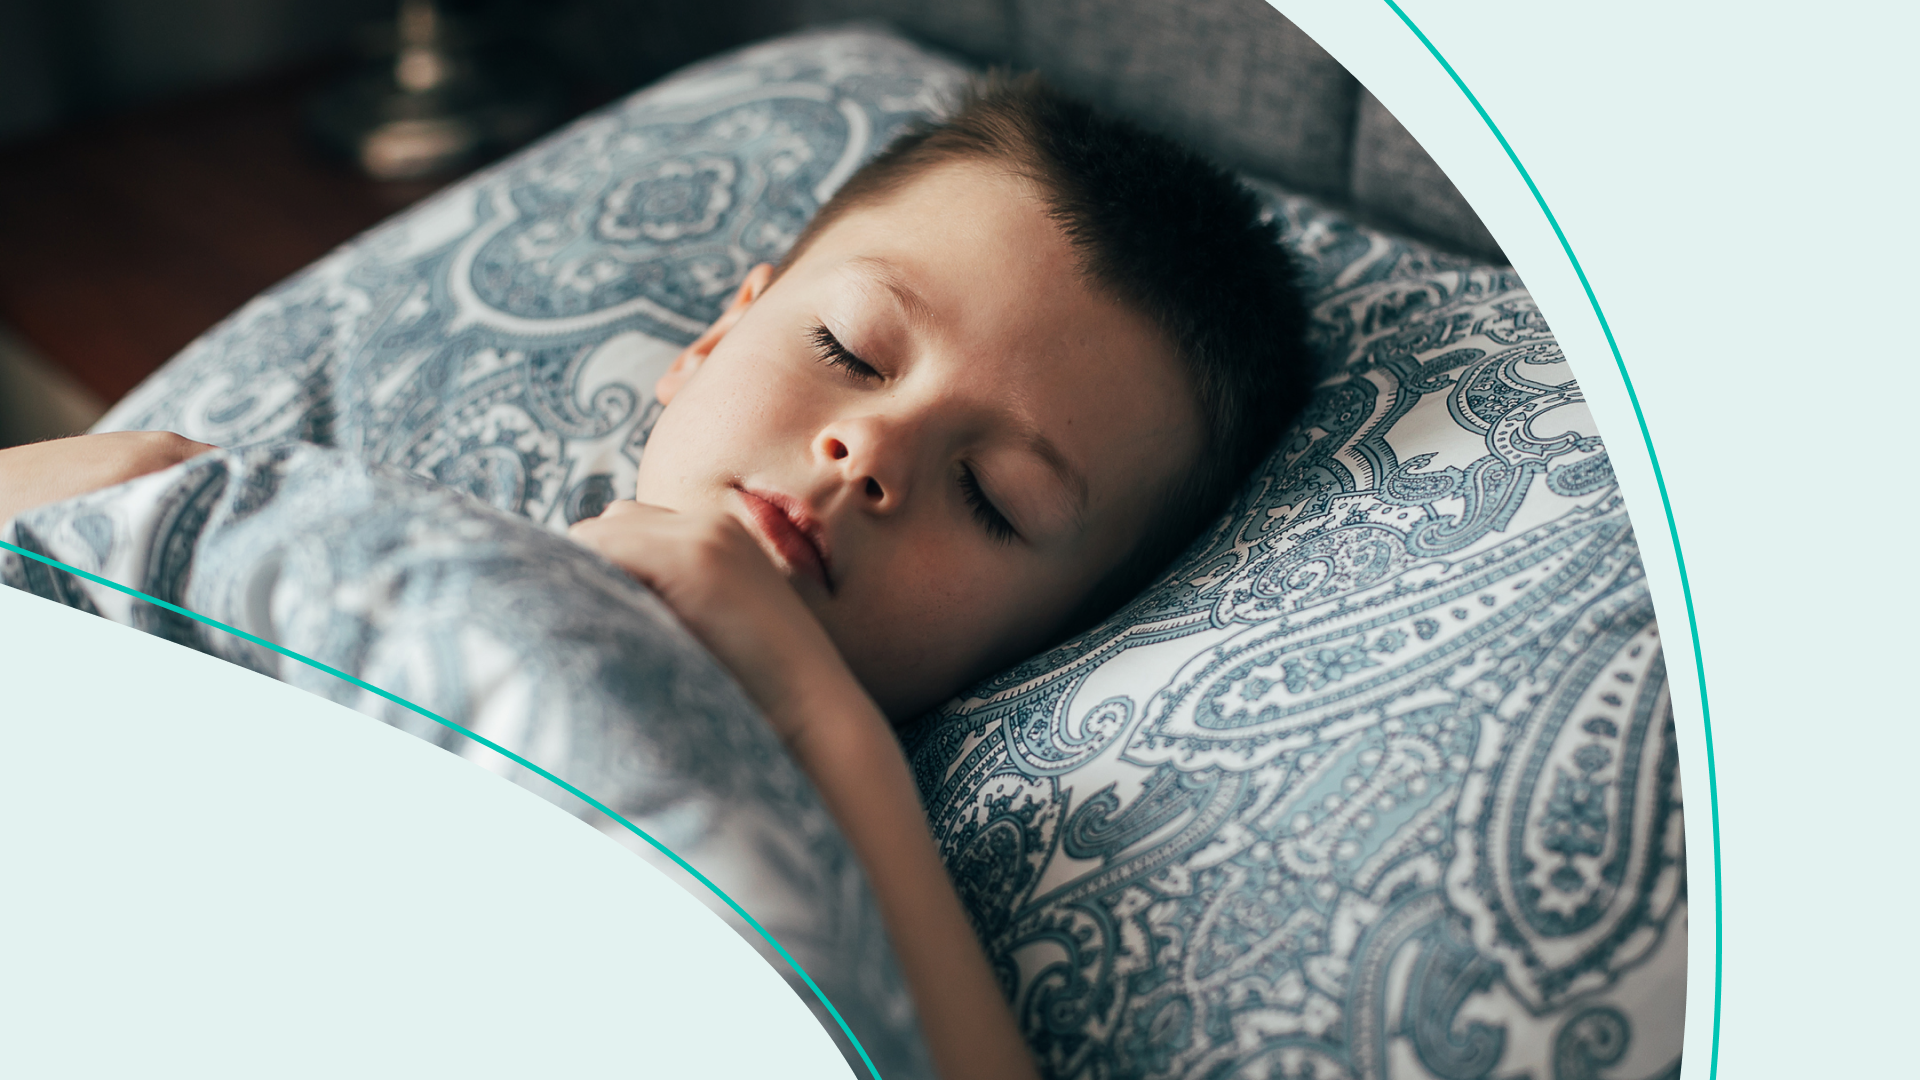 Melatonin for kids has become increasingly popular, but does it work? Experts break down the risks and share tips to help your kid sleep better.